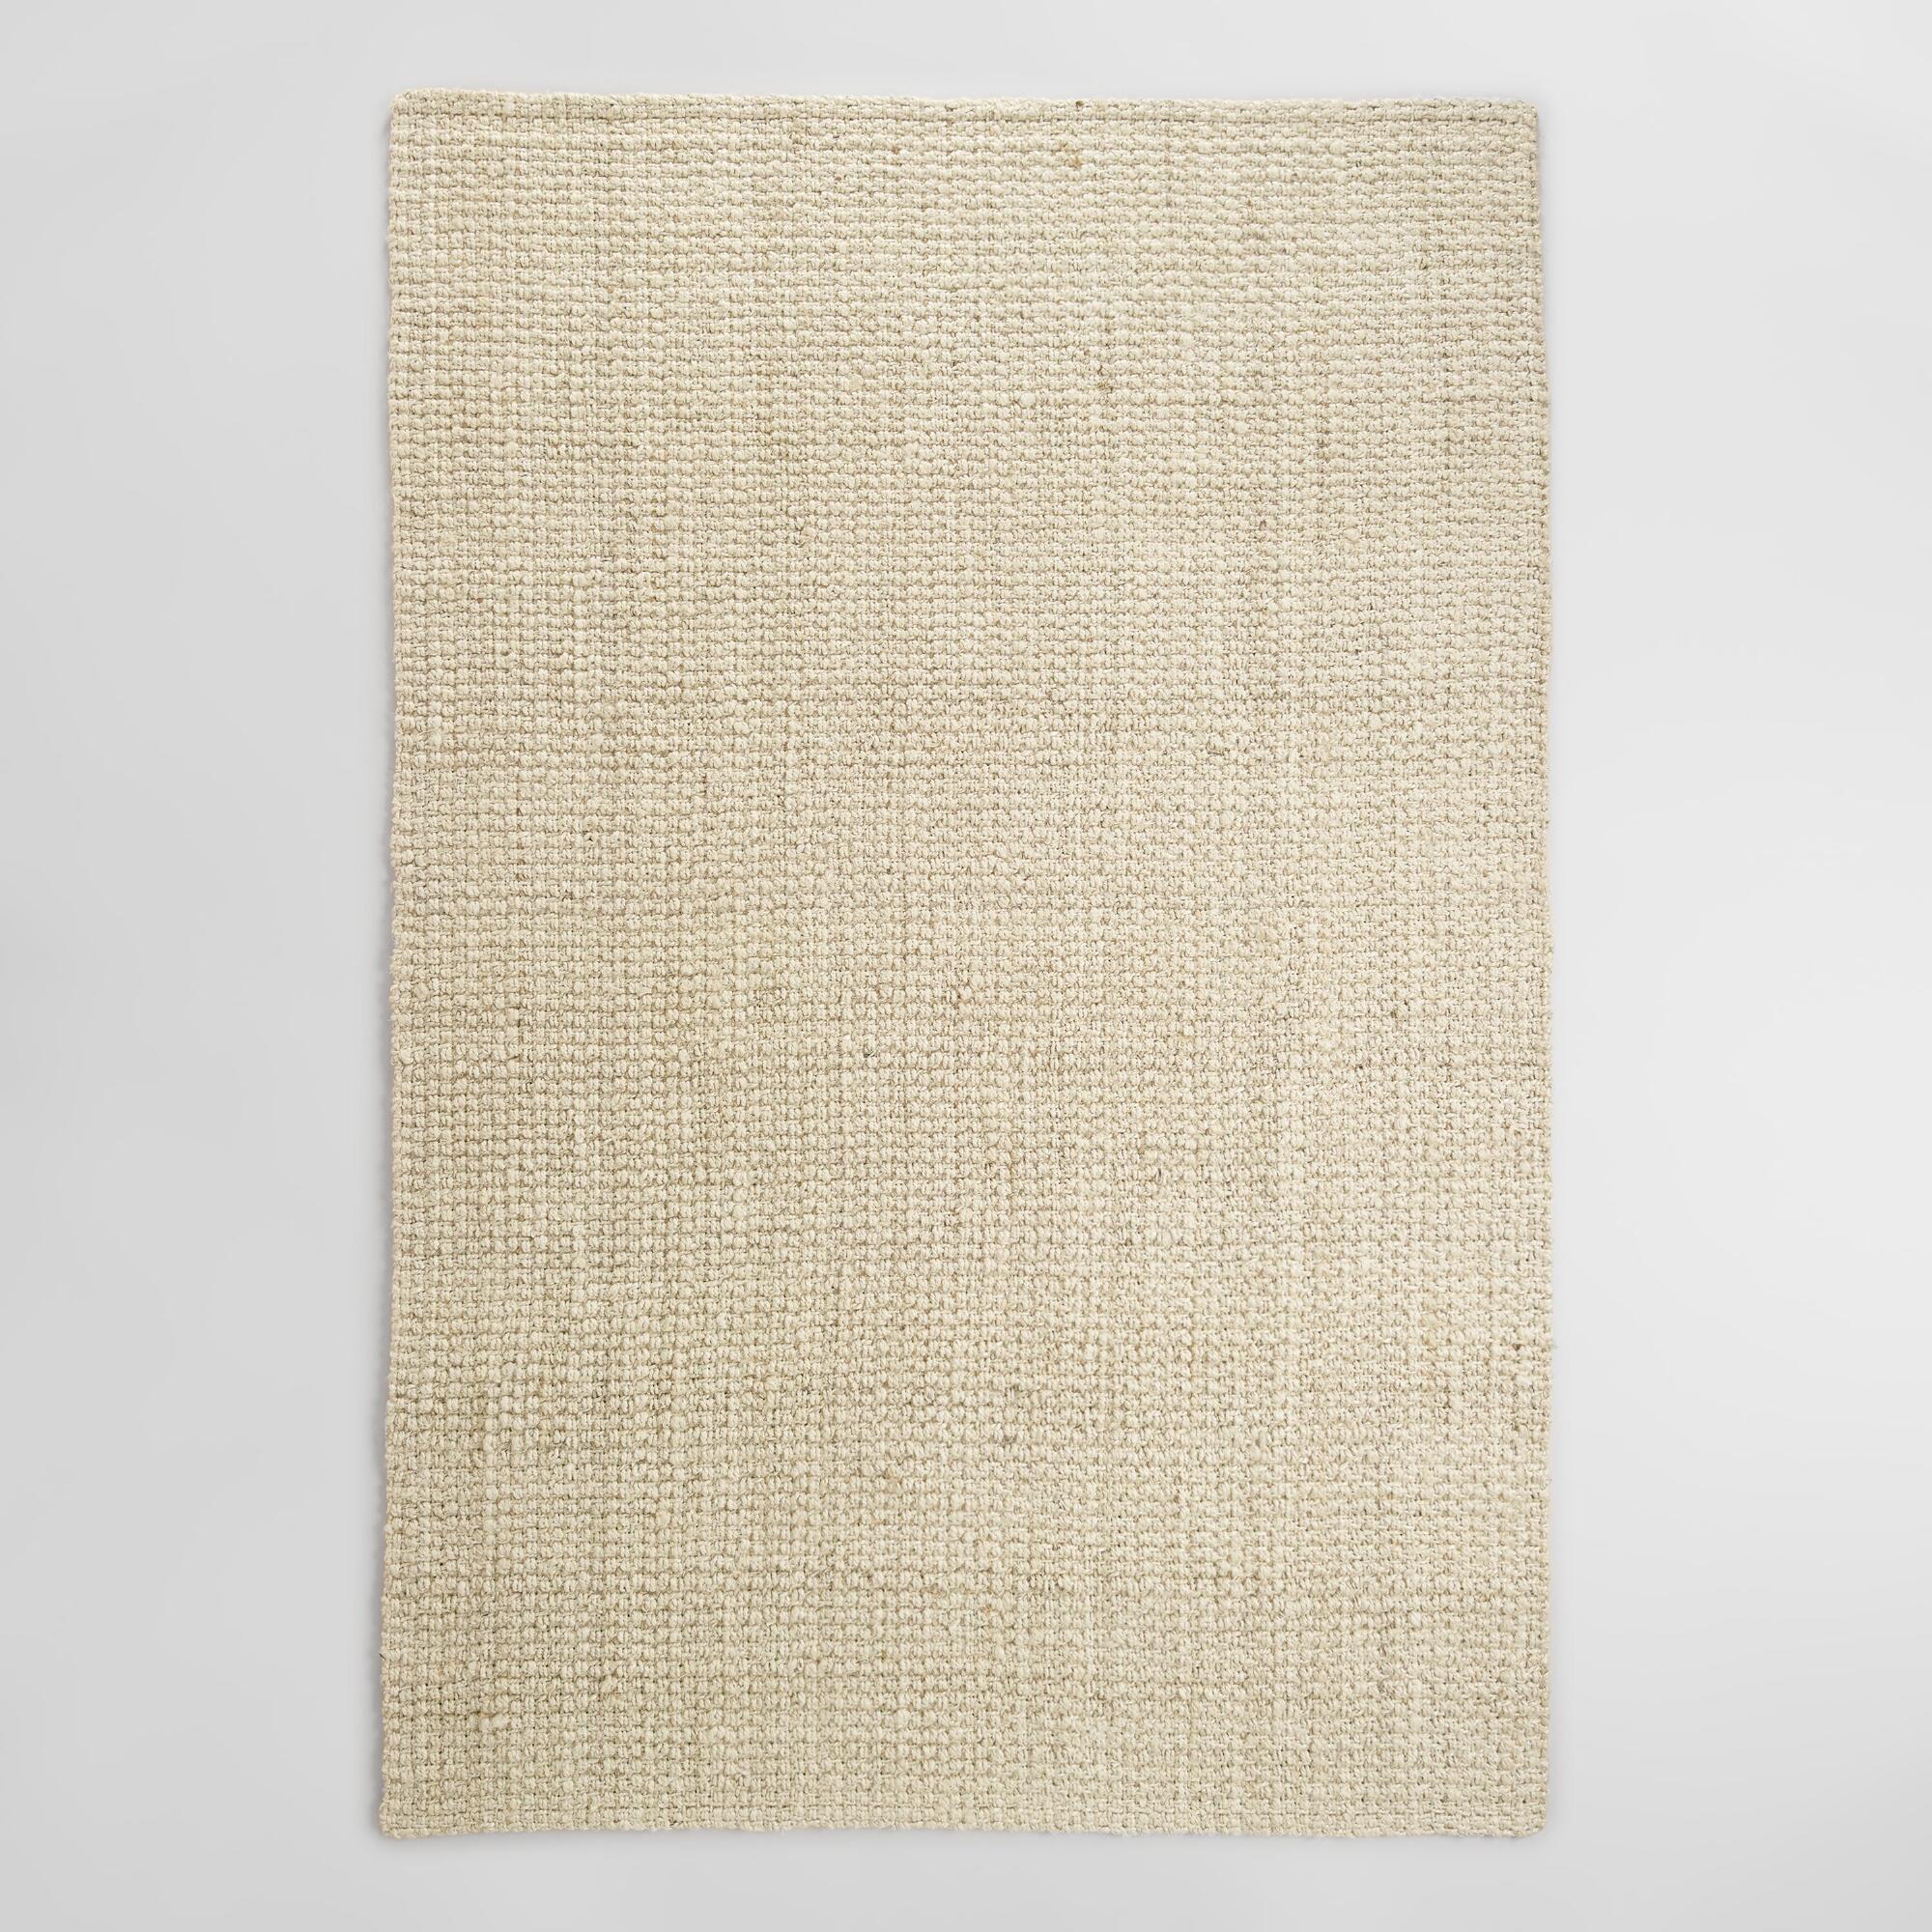 Bleached Ivory Basket Weave Jute Area Rug: White/Natural - 6' x 9' by World Market